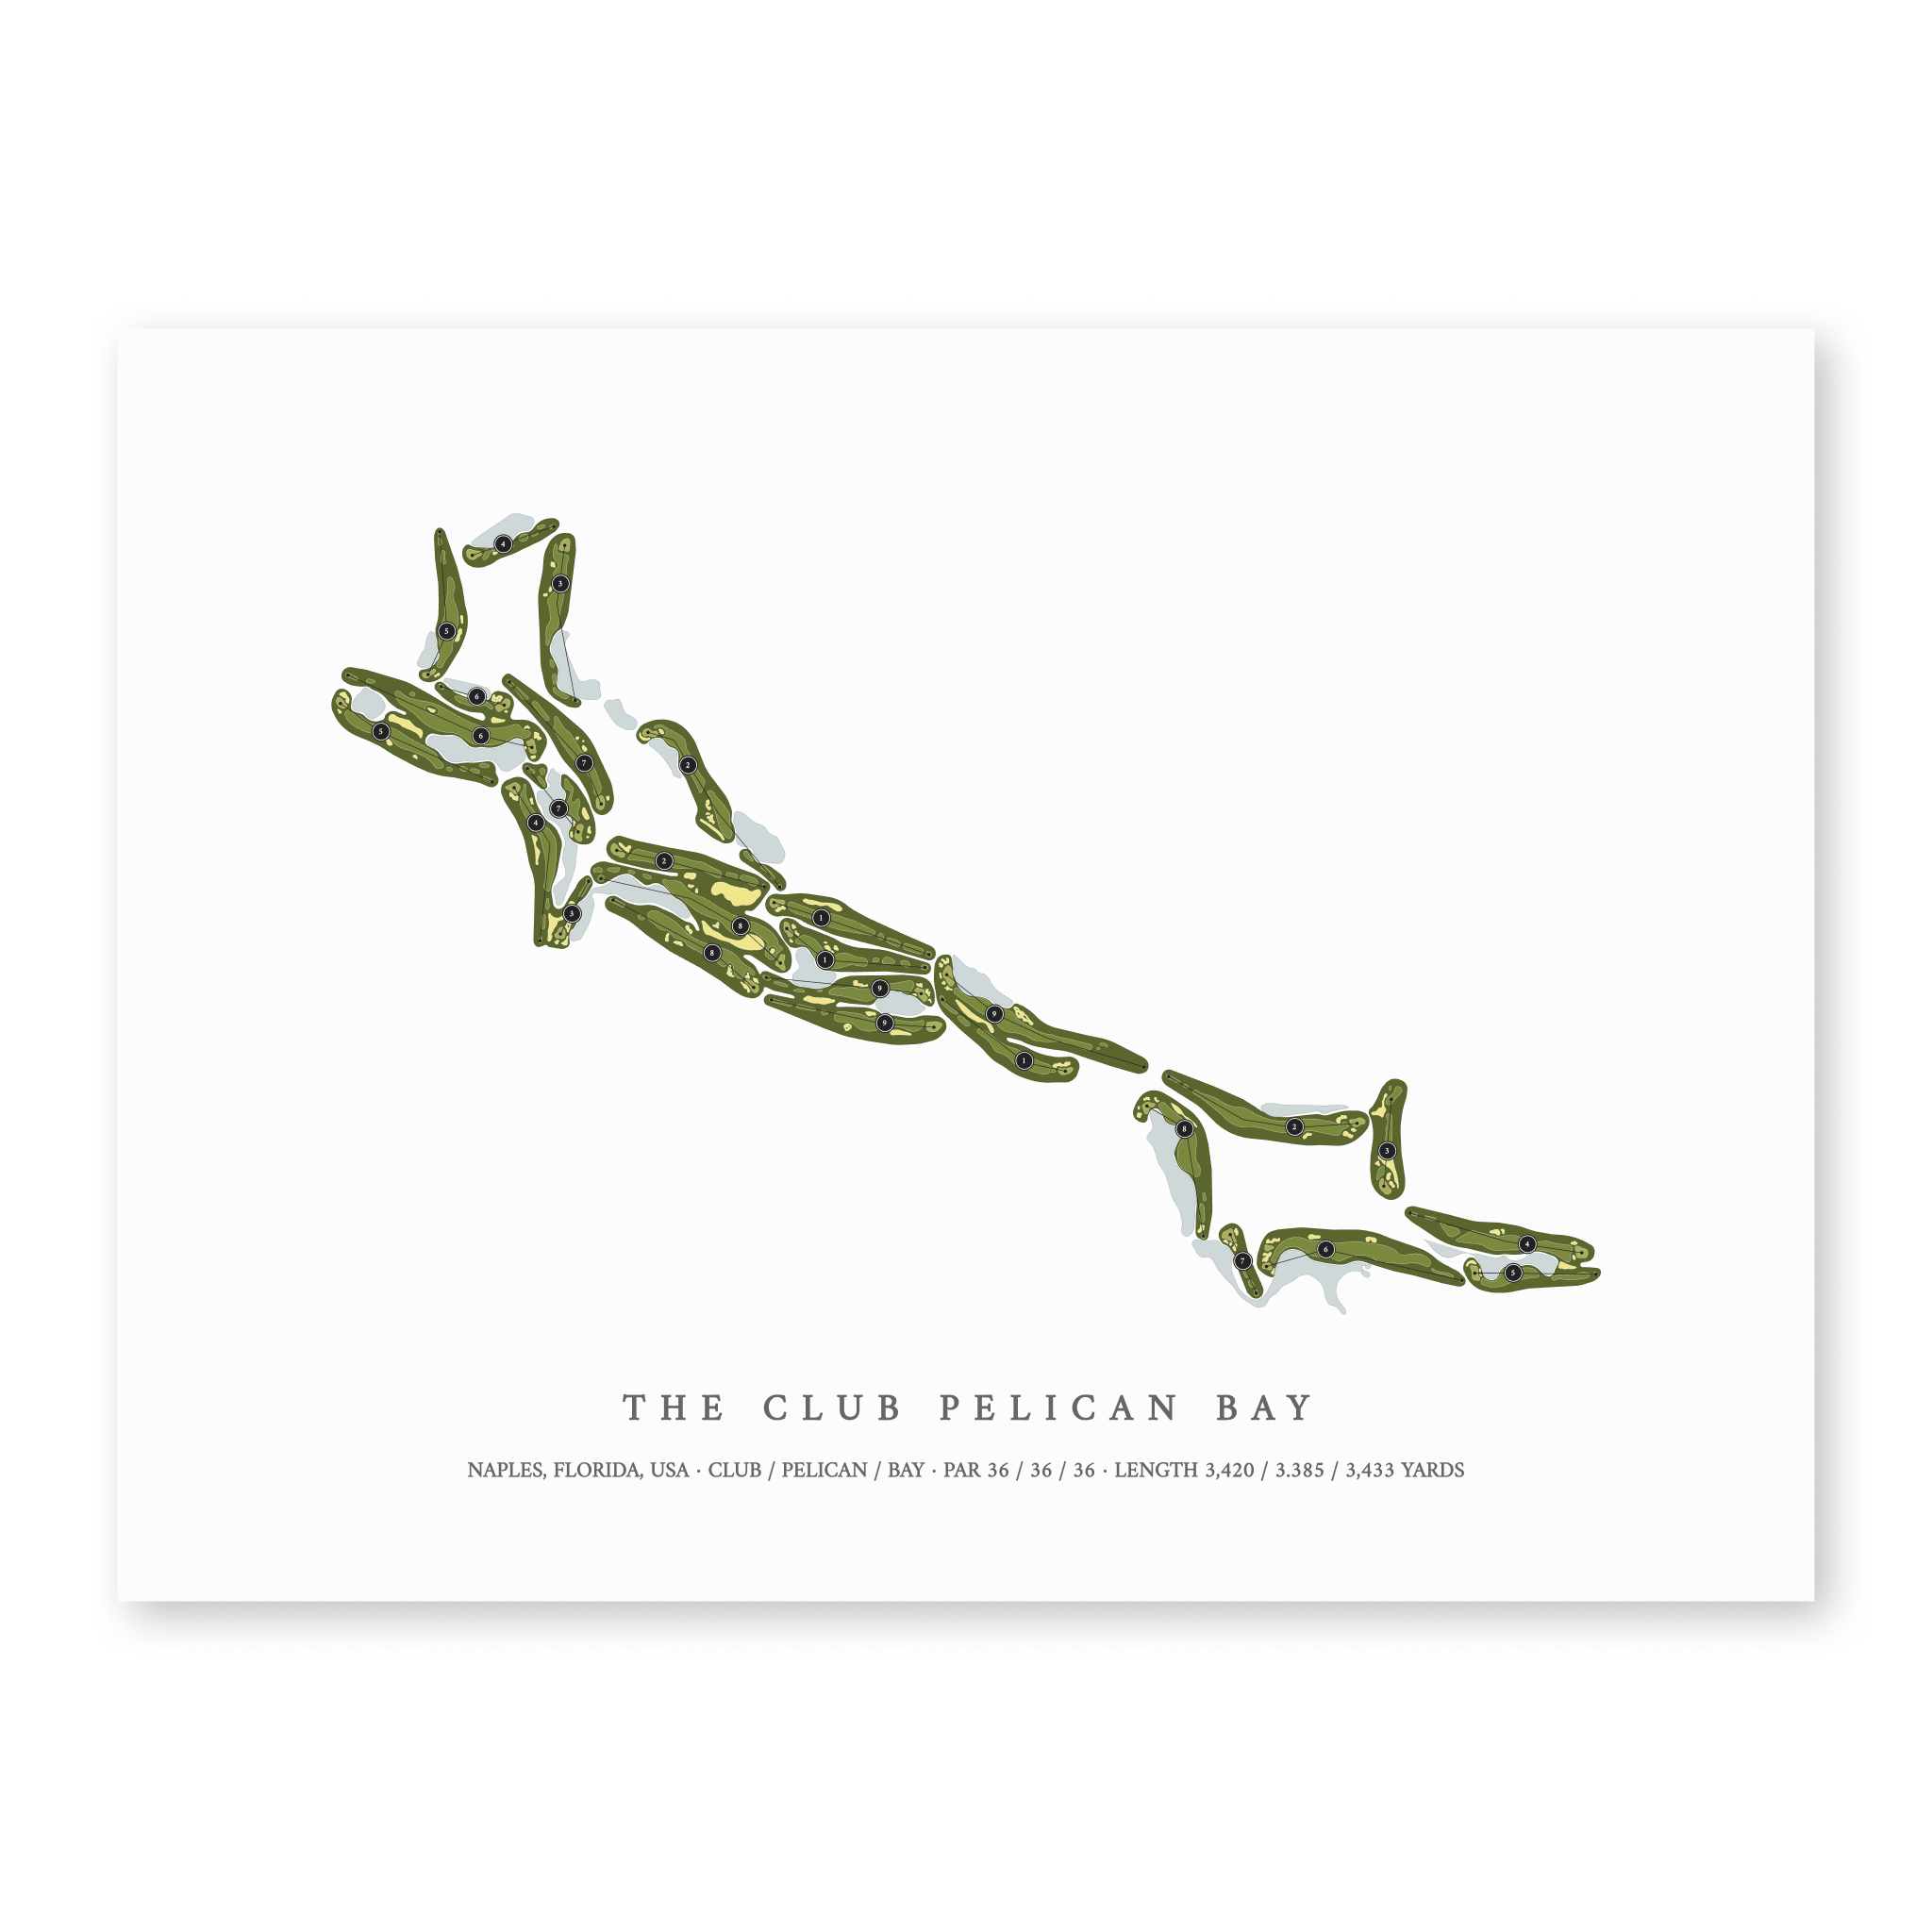 The Club Pelican Bay| Golf Course Print | Unframed With Hole Numbers #hole numbers_yes